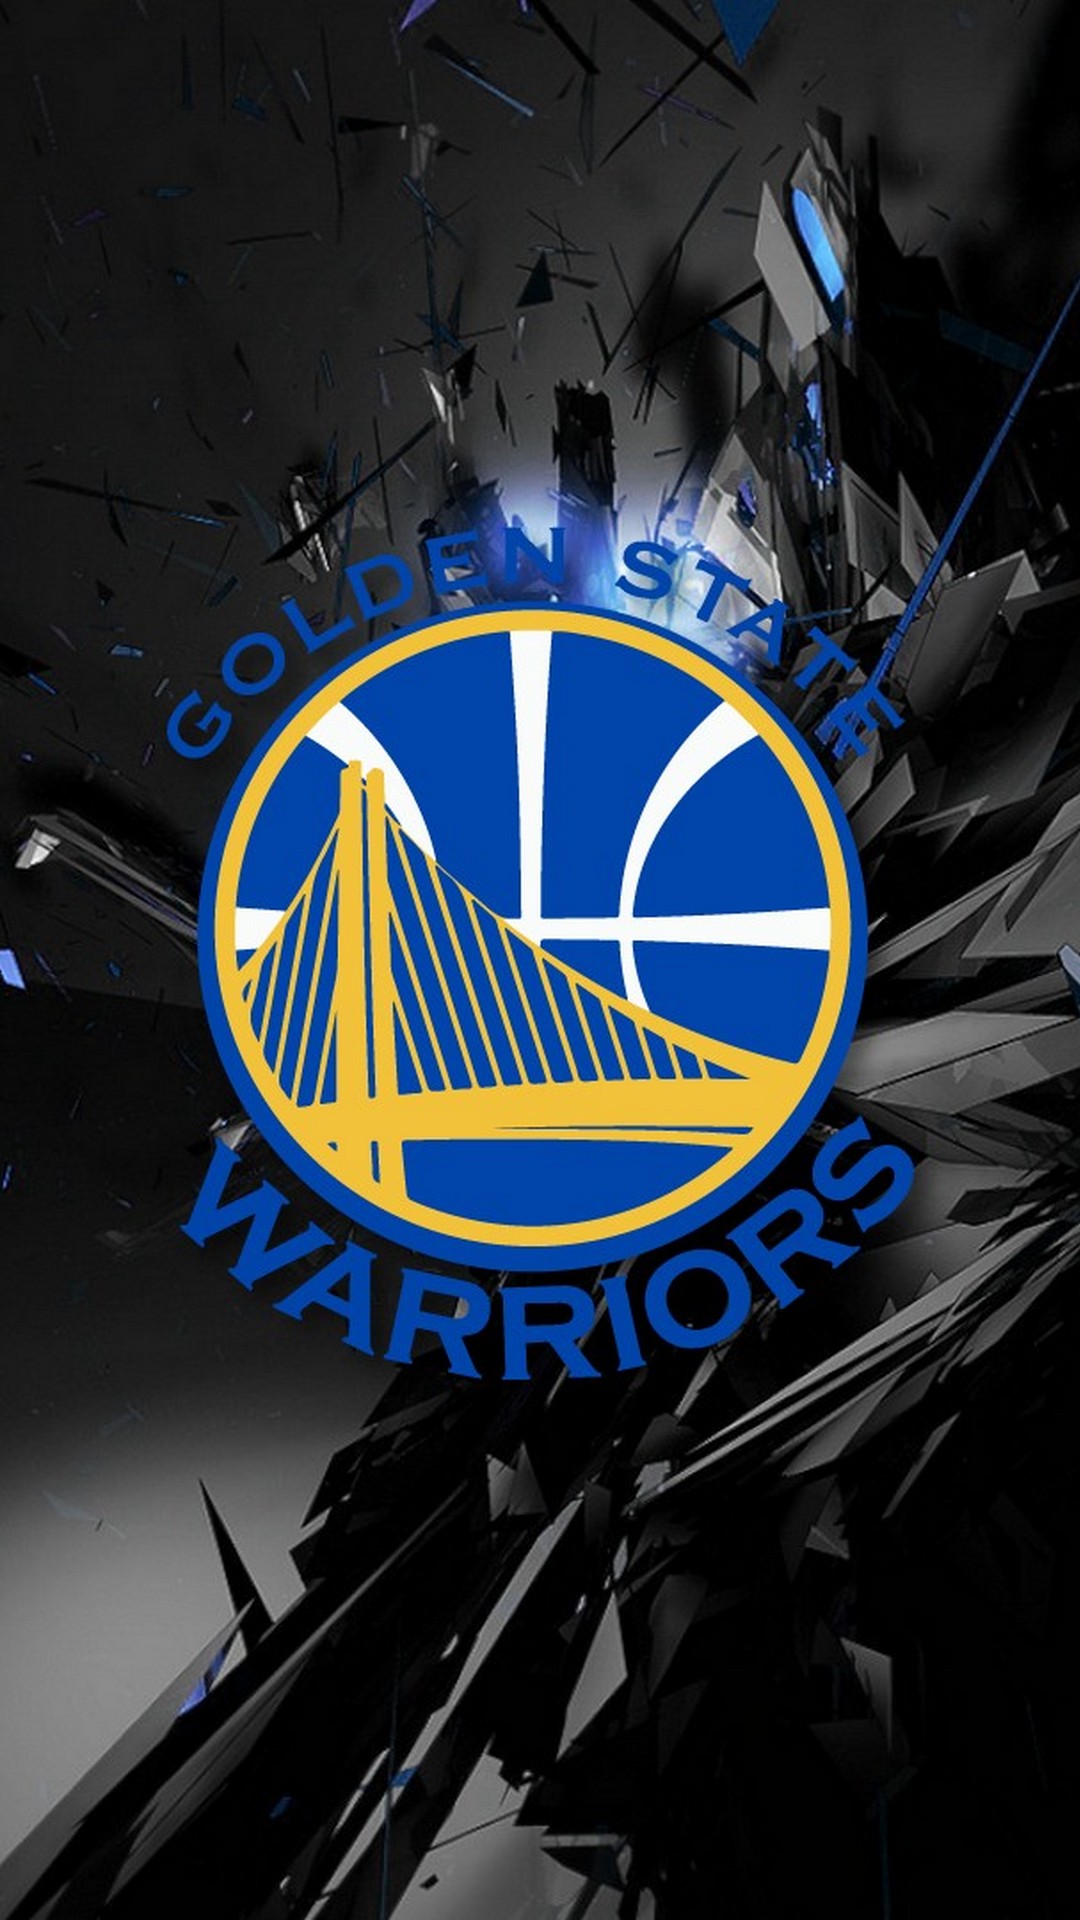 Golden State Warriors Wallpaper Iphone Hd With Image - Golden State Warriors Wallpaper Hd - HD Wallpaper 